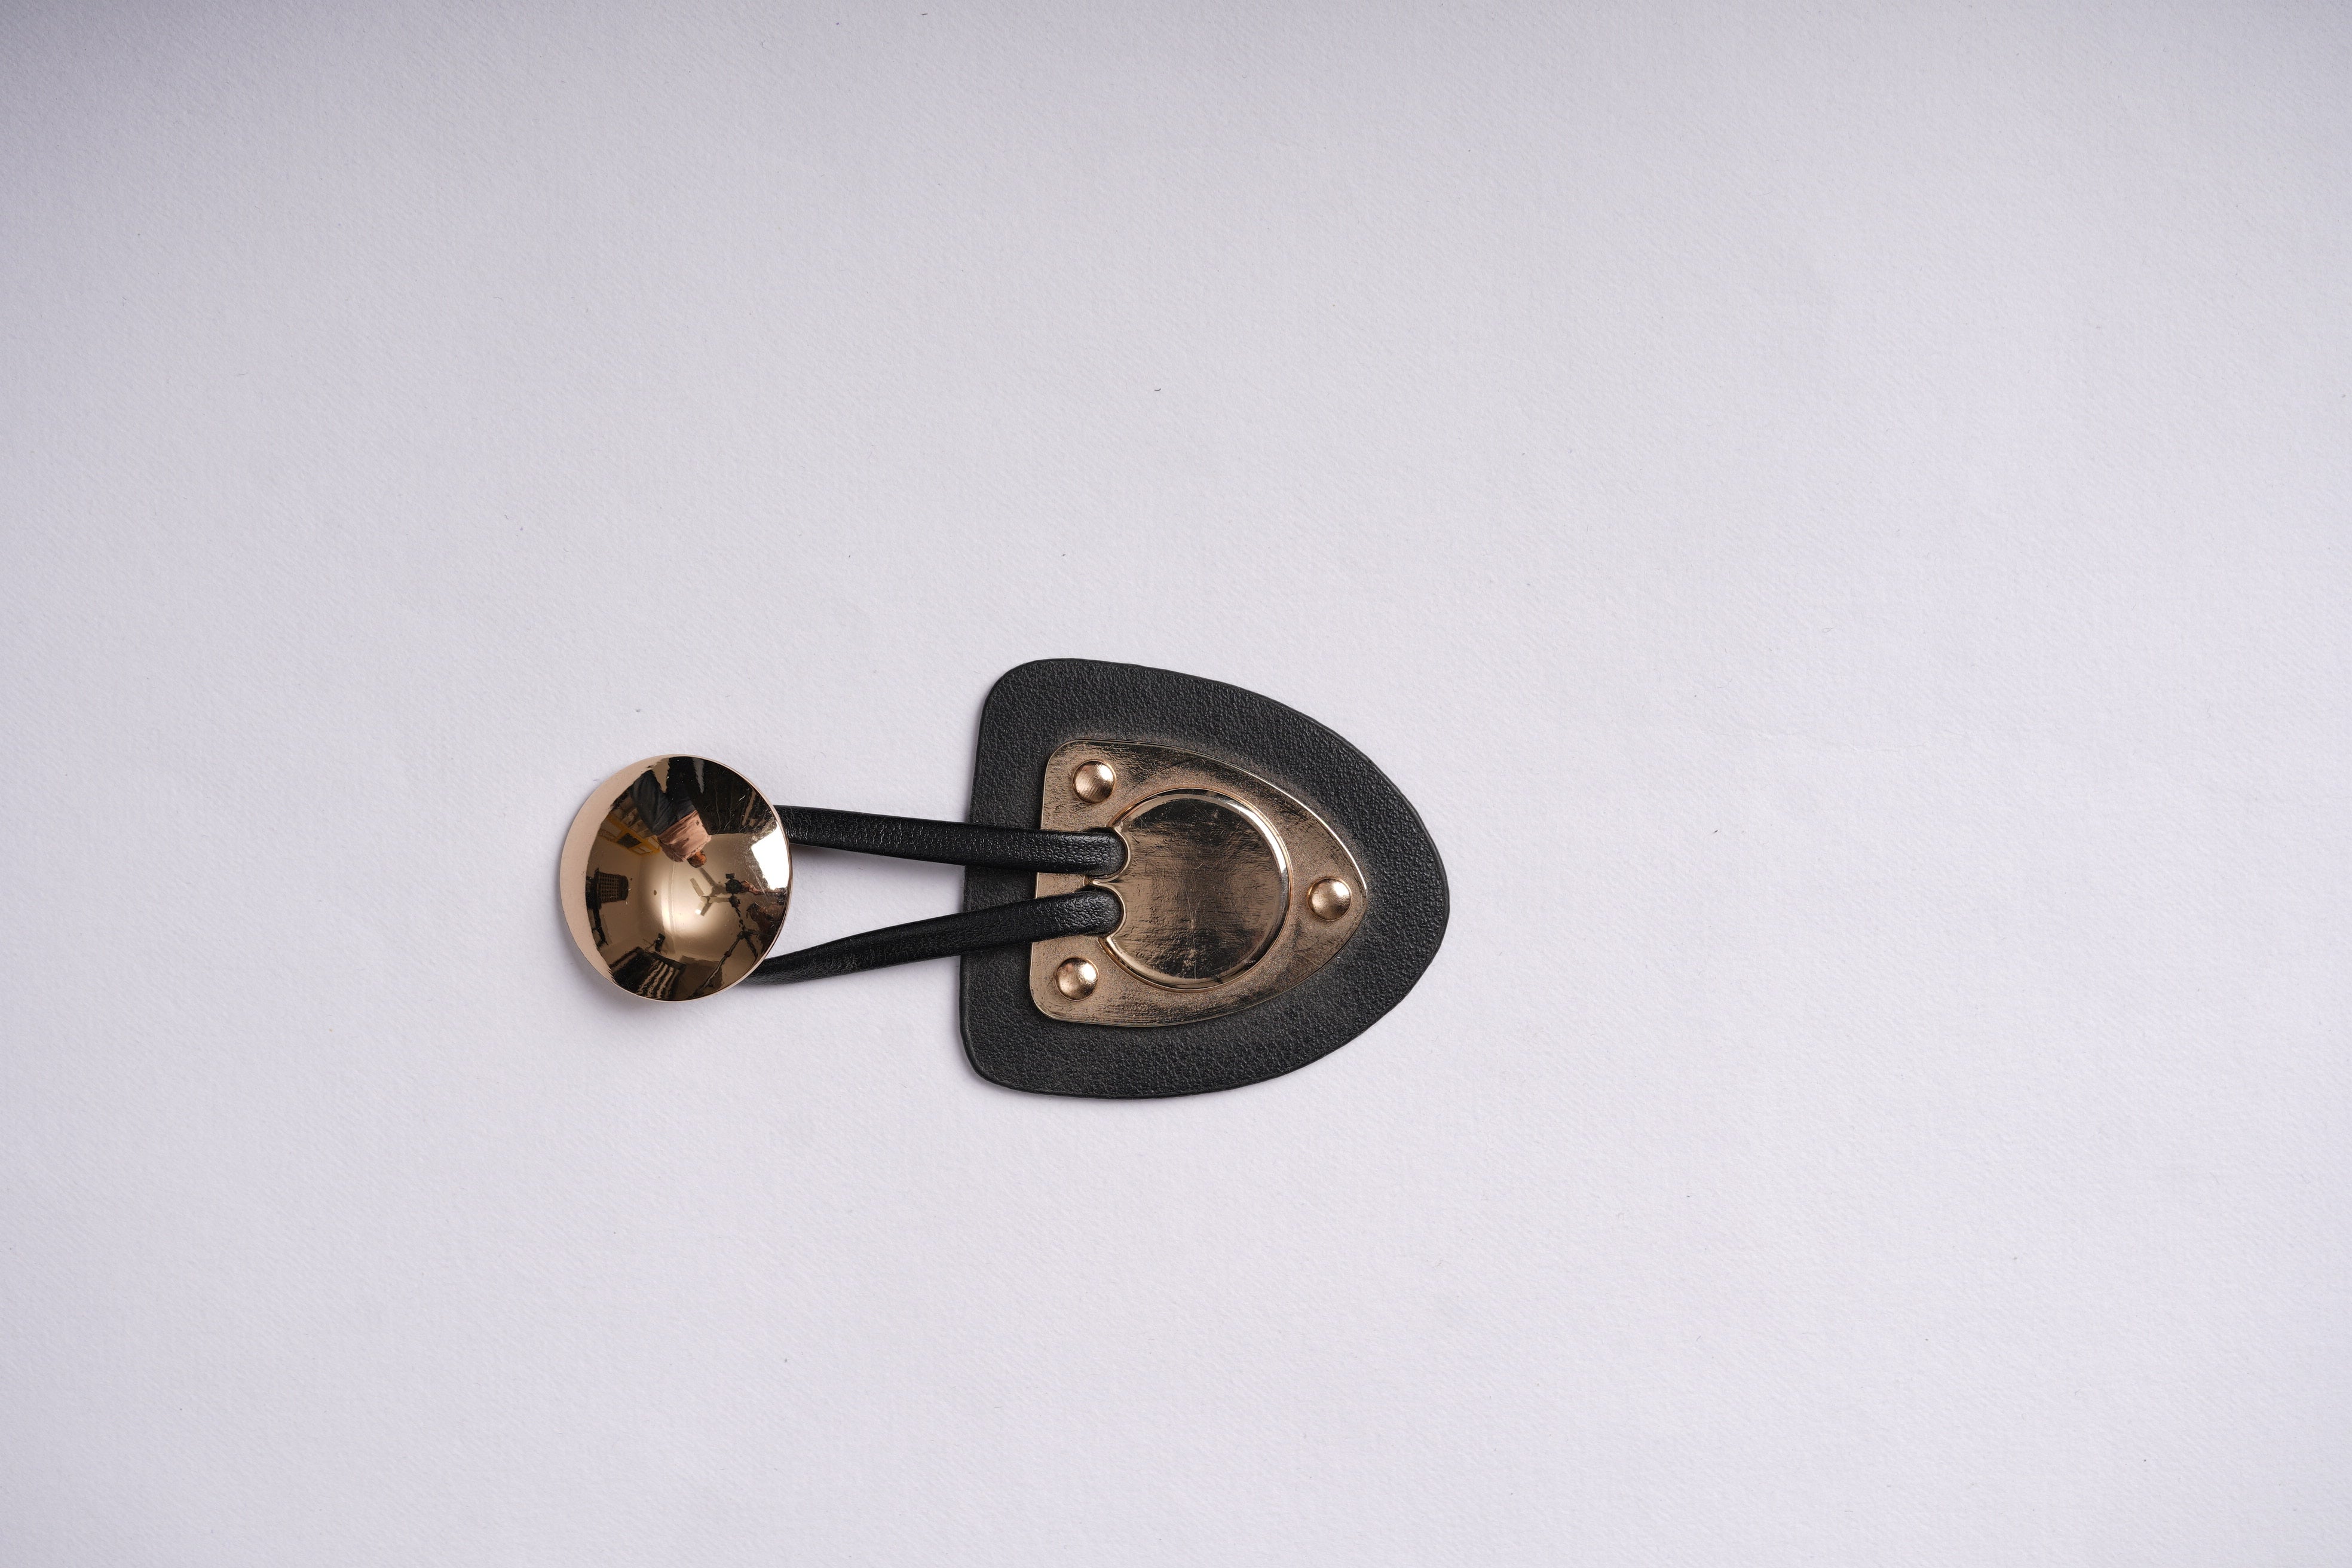 SUPERIOR QUALITY SHINY GOLD BUTTON WITH PU LEATHER TOGGLE FOR JACKETS